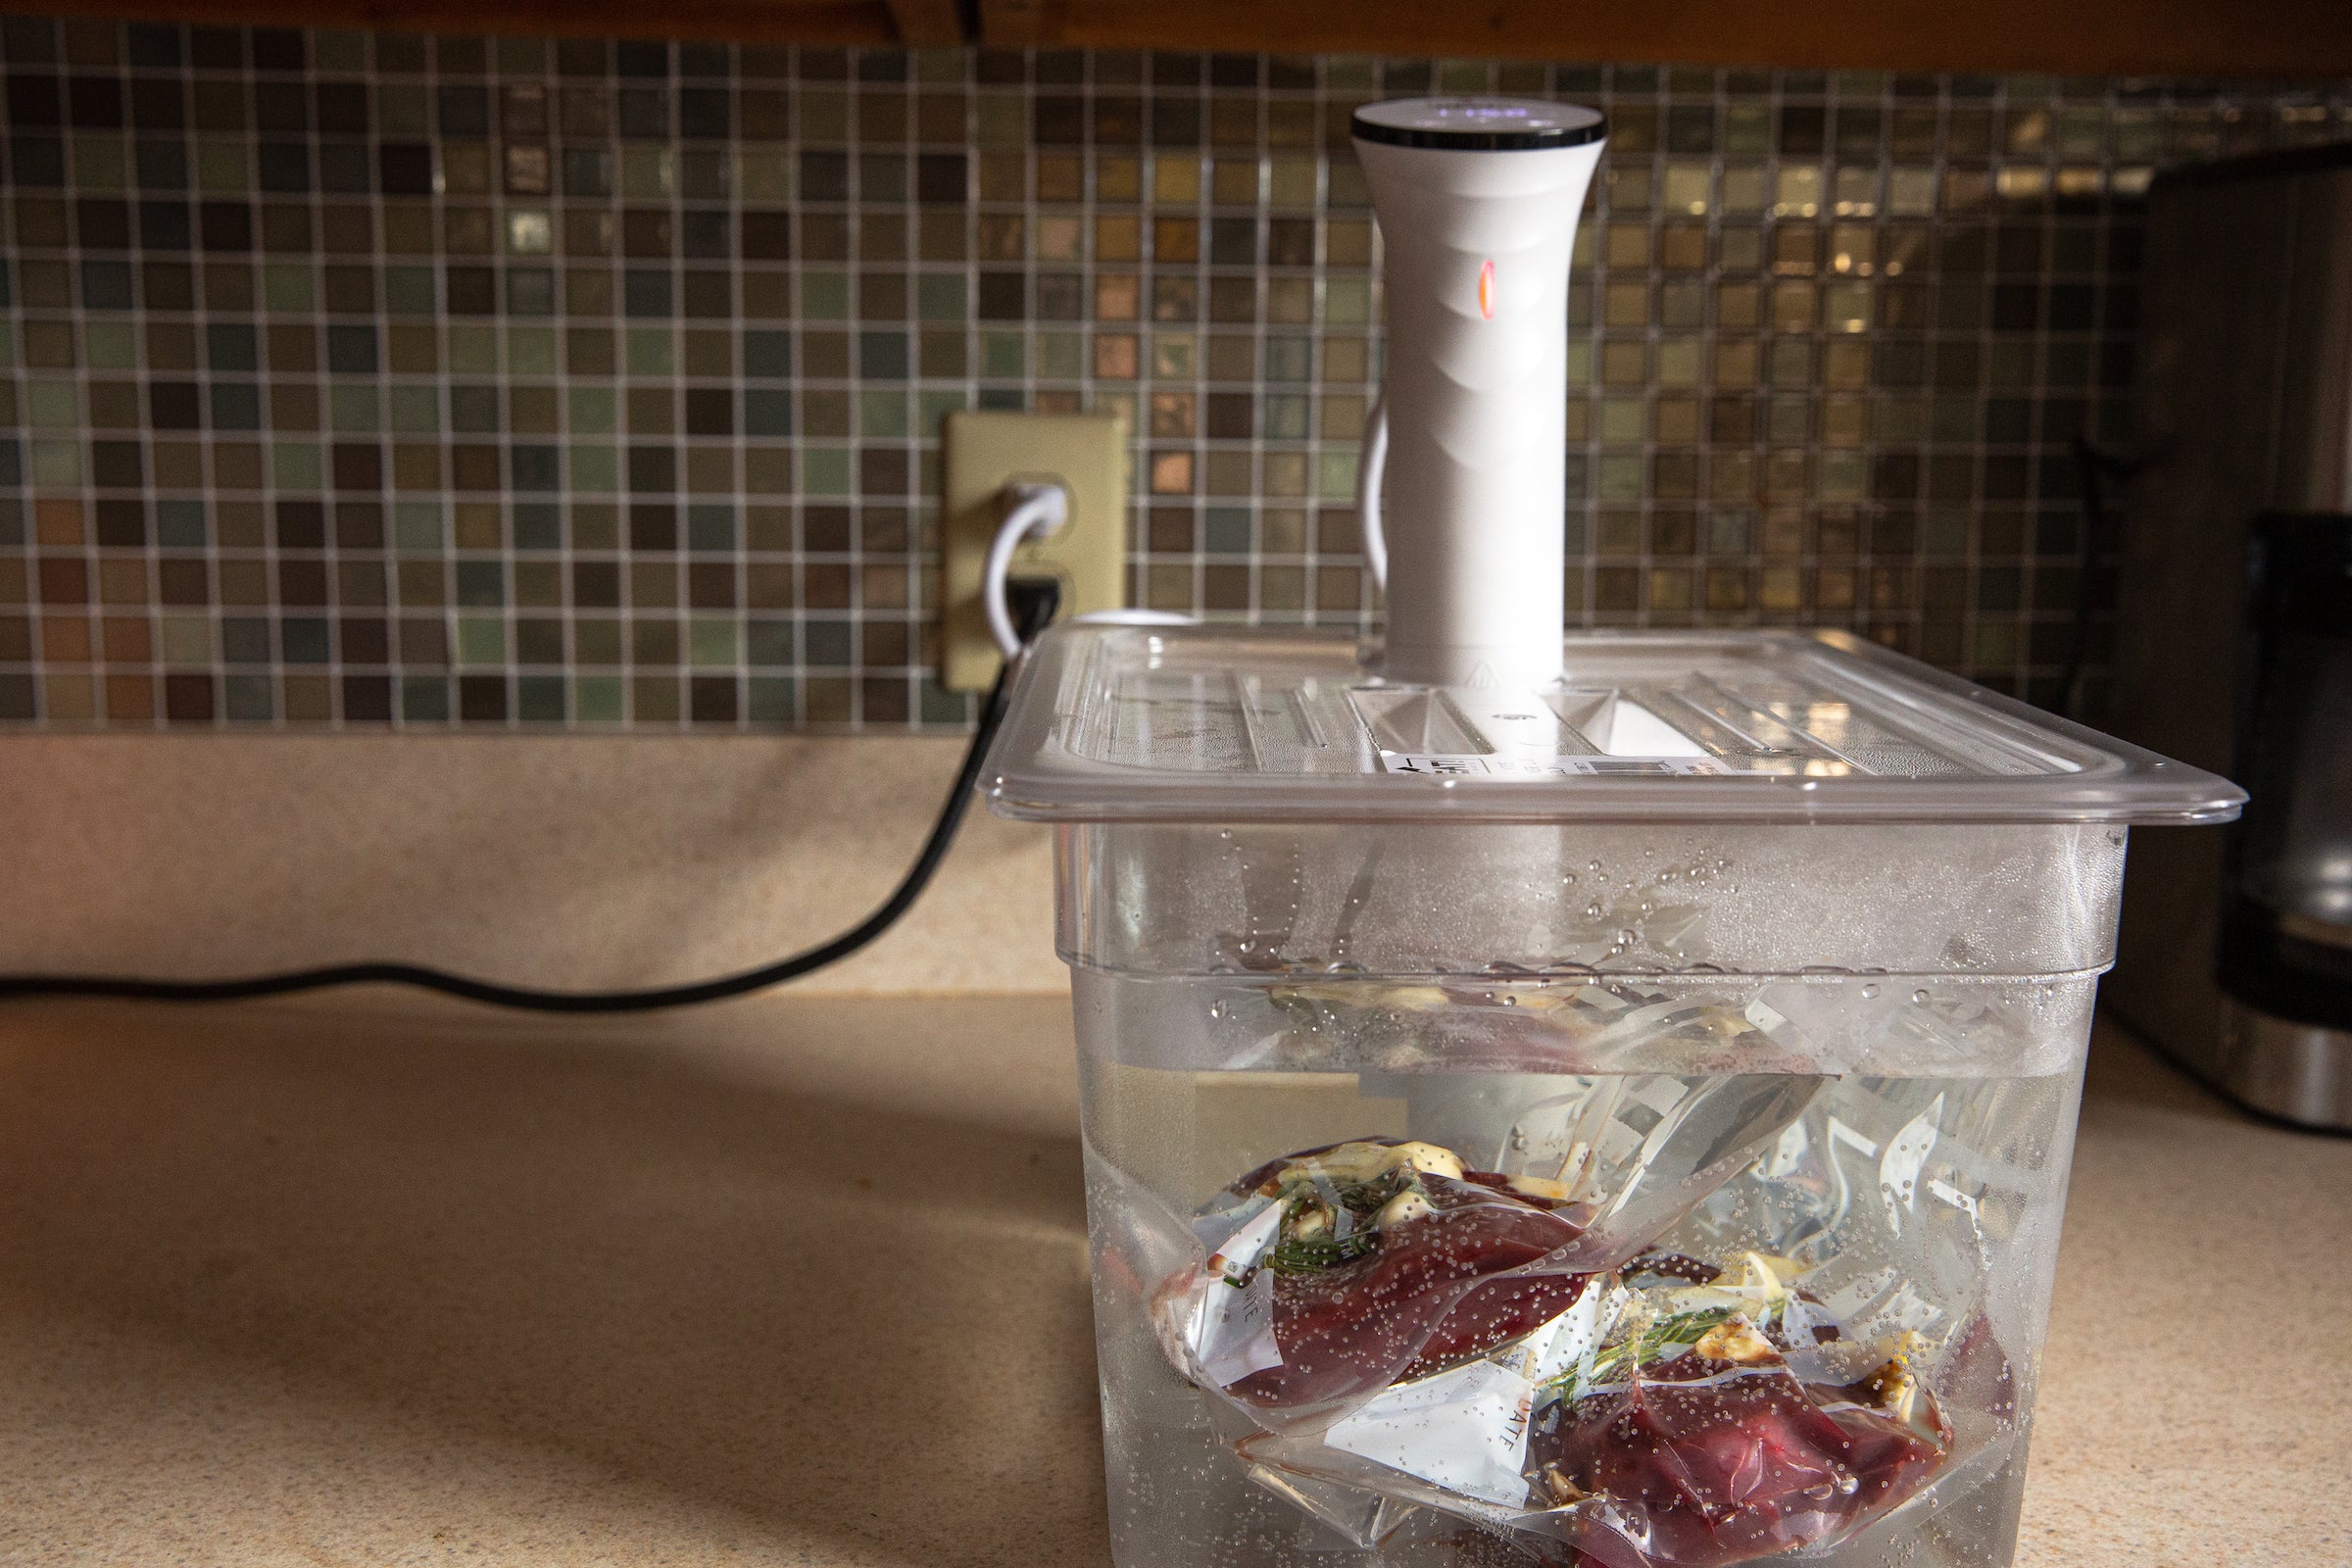 sous vide cooker with vension in a hot water bath.